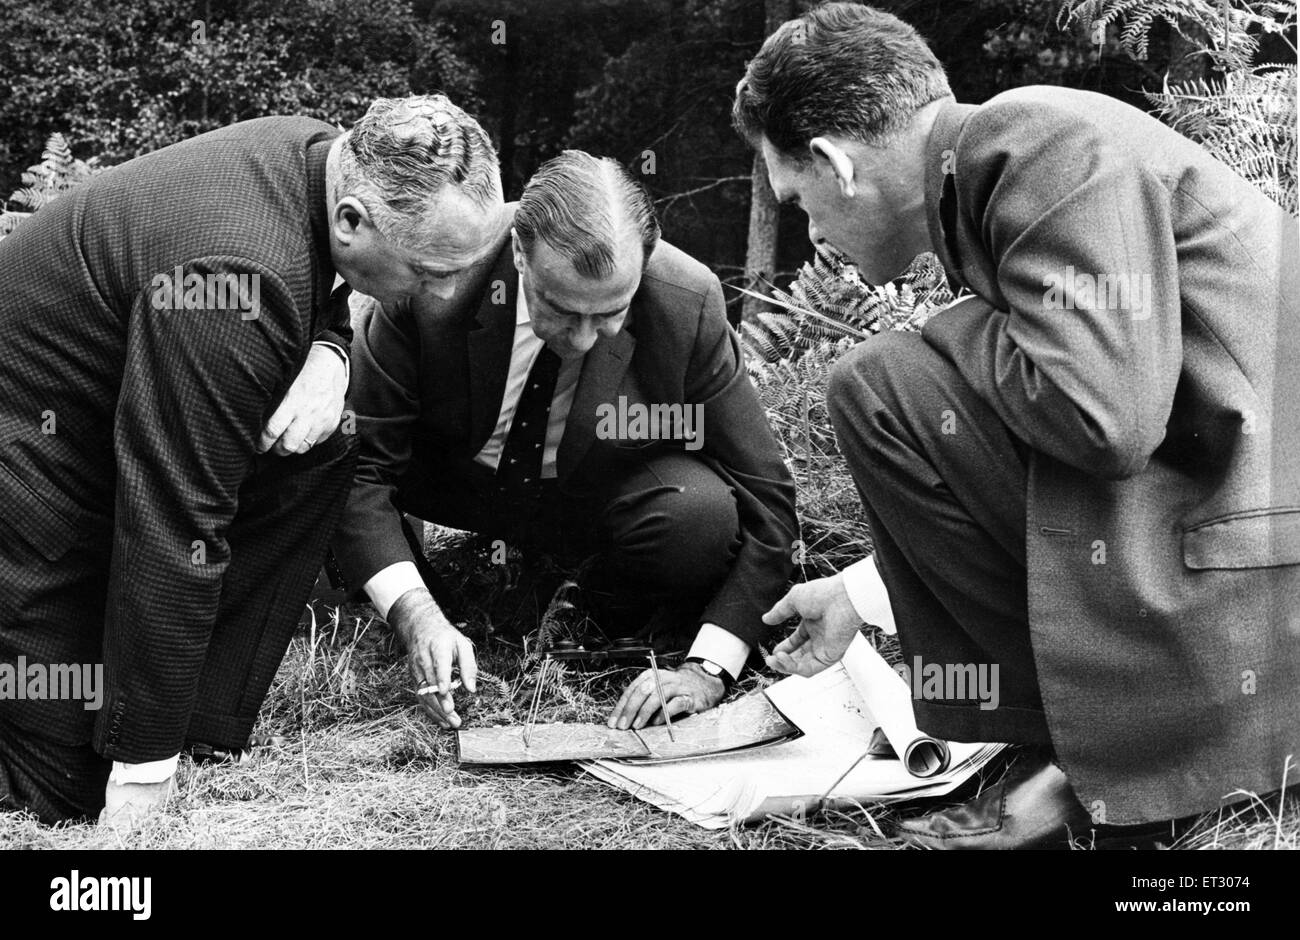 Assistant Chief Constable S E Bailey, Det. Chief Supt. H Bailey and Det. Insp. Fernihough study aerial pictures with a stereoscopic viewer amongst the ferns on Cannock Chase. The Cannock Chase murders (also known as the A34 murders) were the murders of th Stock Photo